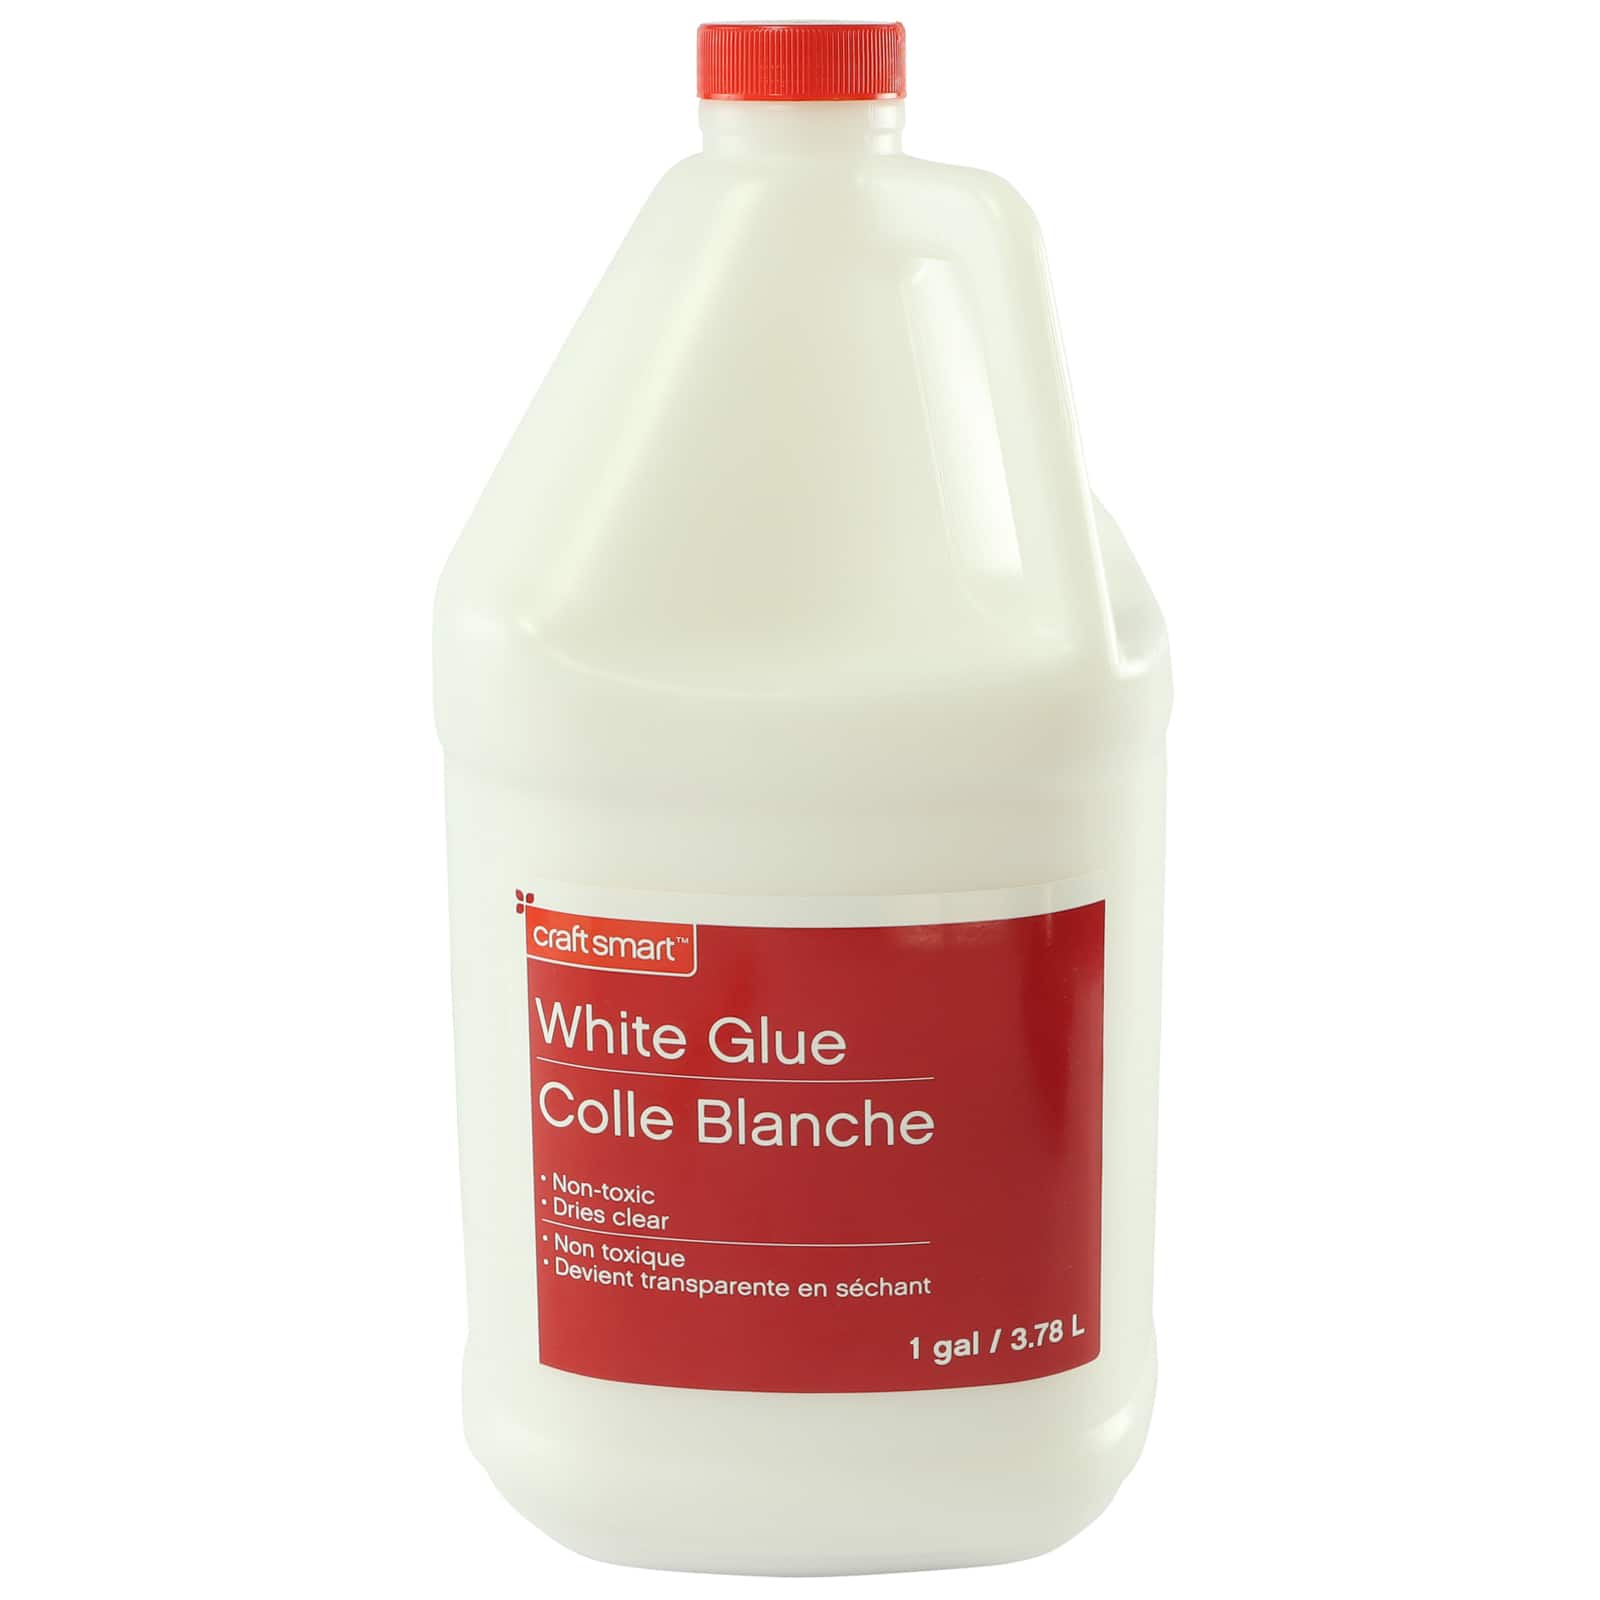 White Glue. Wood & Porous Materials 250 g. Modeling & Crafts